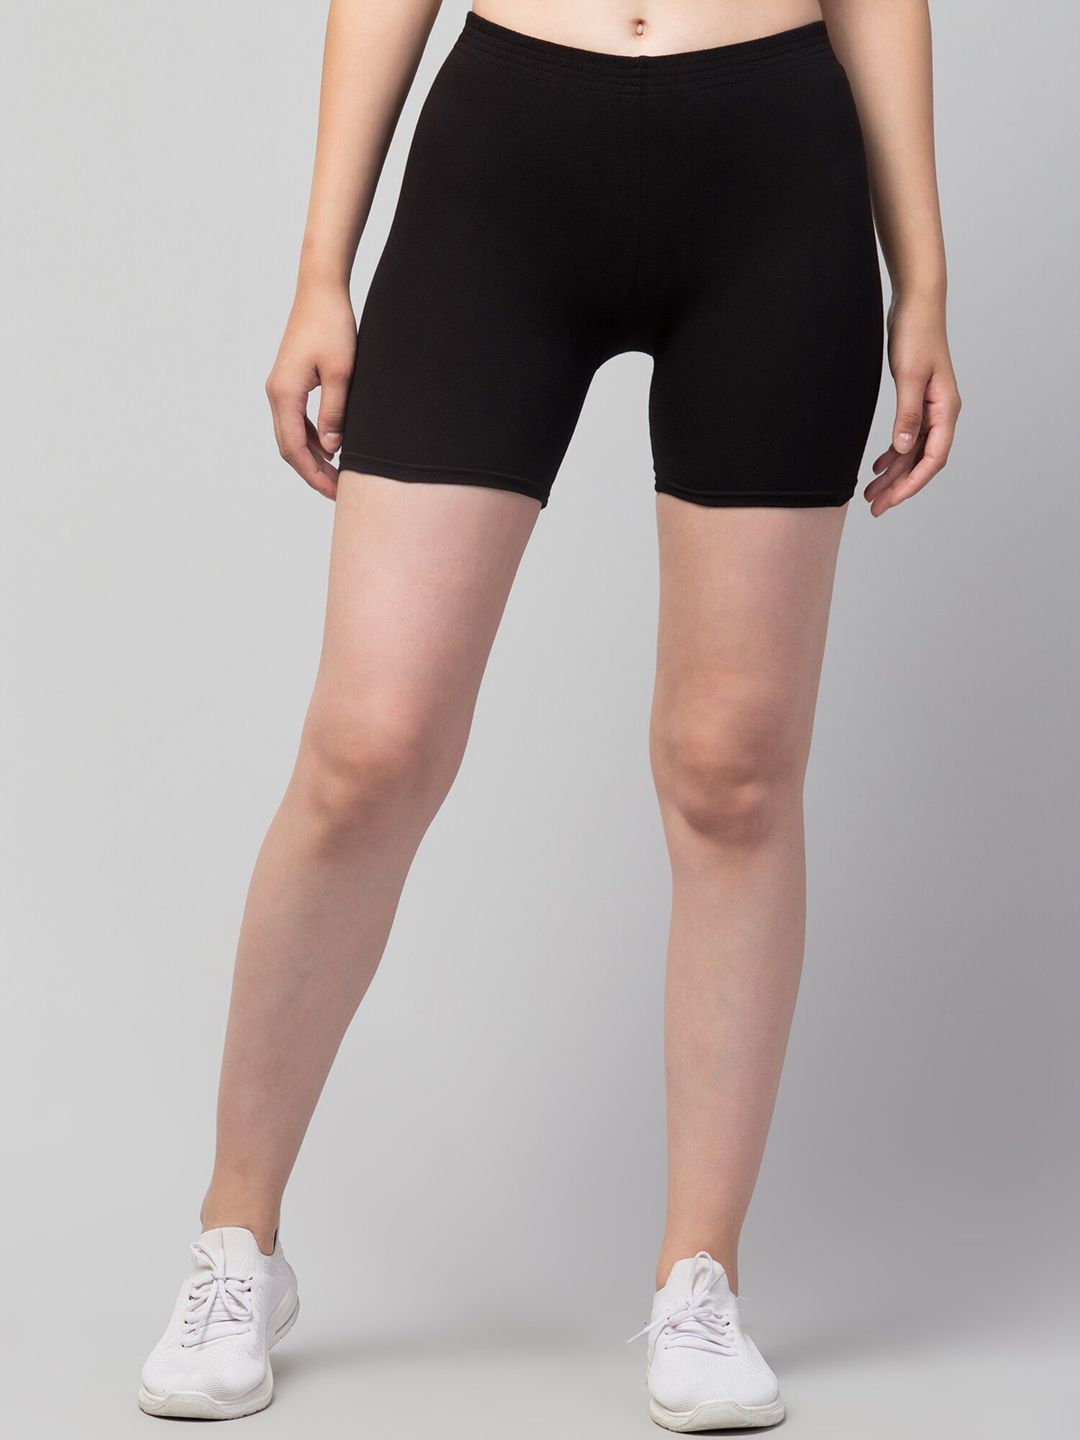 Apraa & Parma Women Black Cycling Sports Shorts Price in India